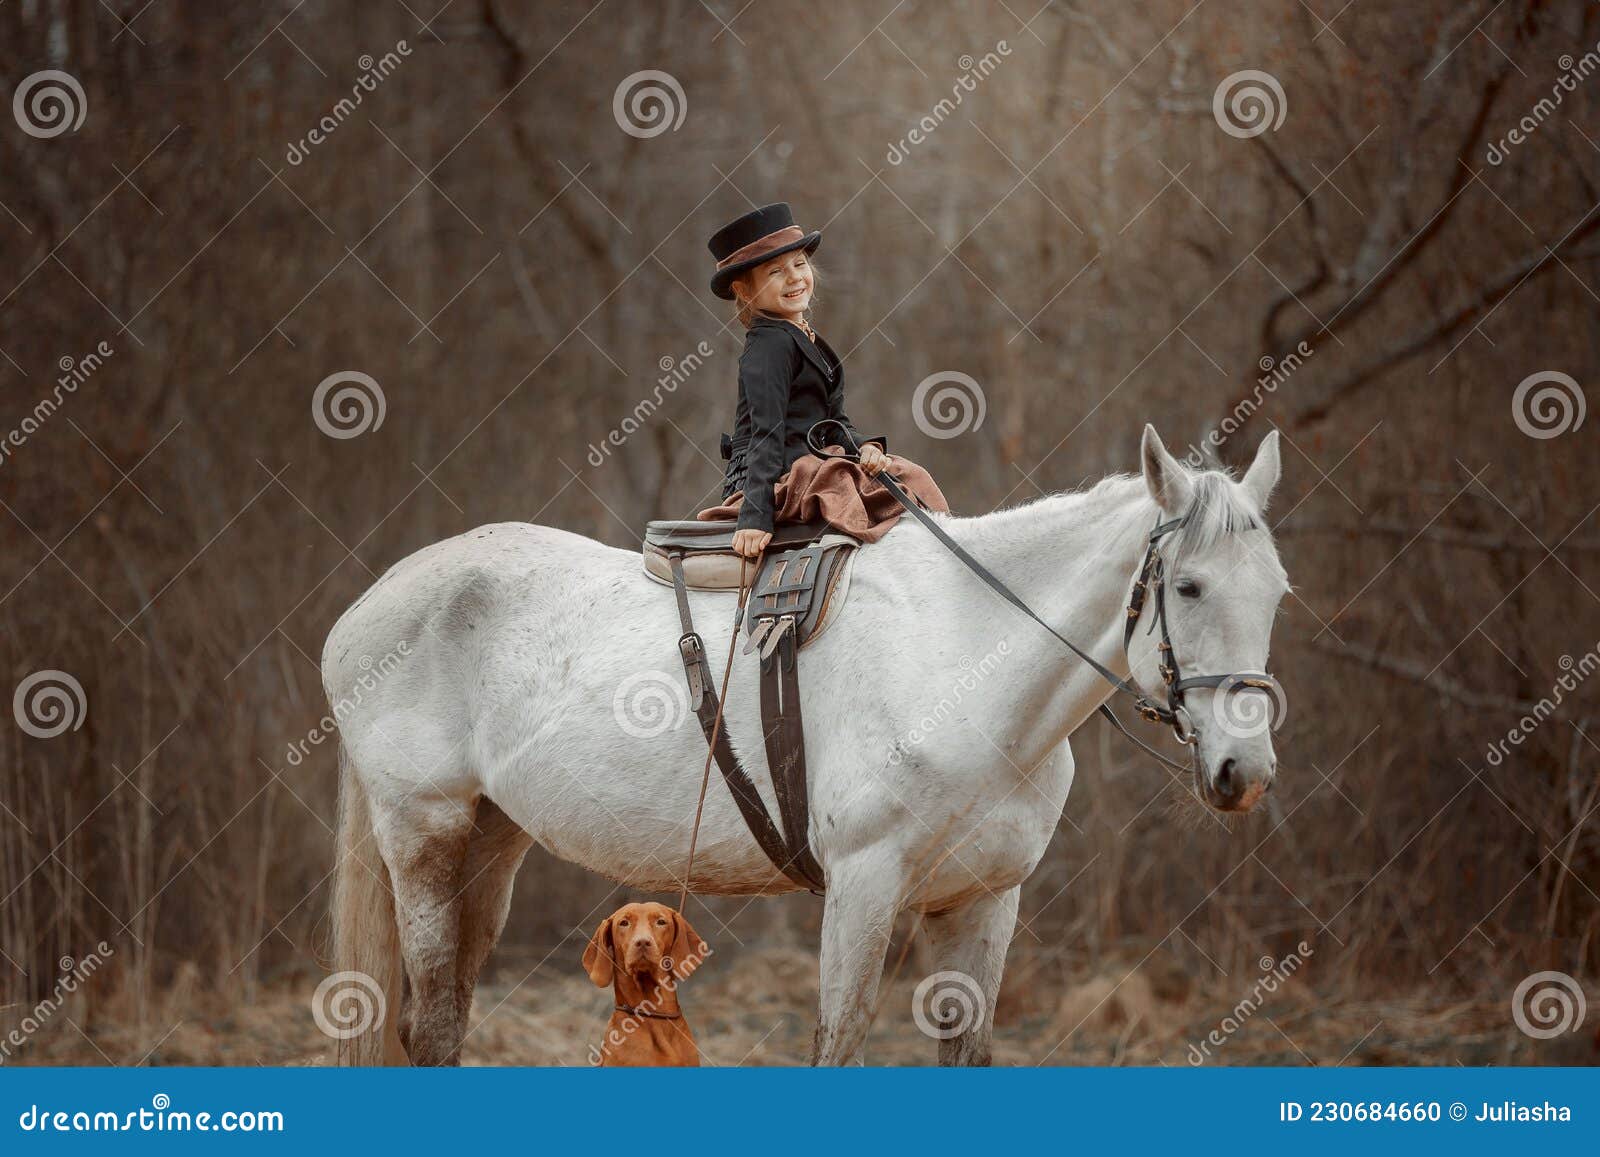 little girl in riding habit with horse and vizsla